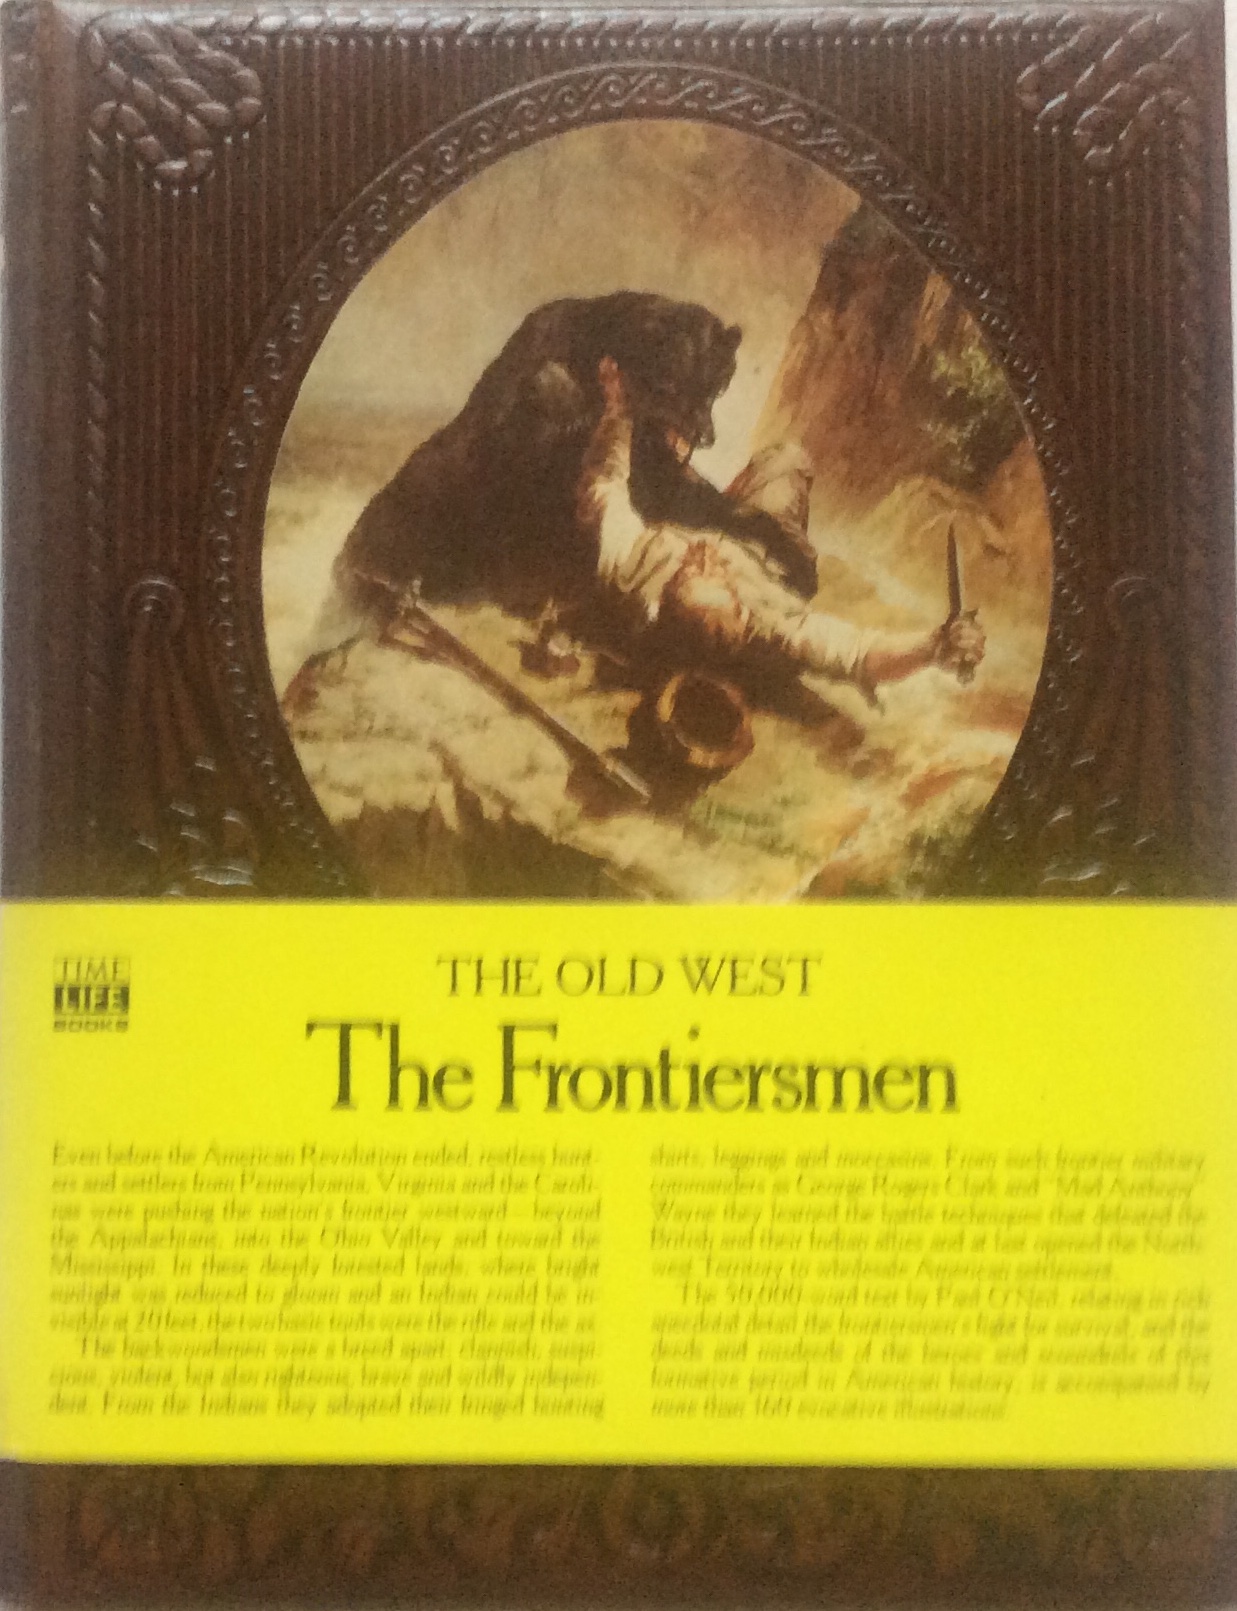 The Frontiersmen (The Old West) - O'Neil, Paul; Time-Life Books With Text By Paul O'Neil, Of